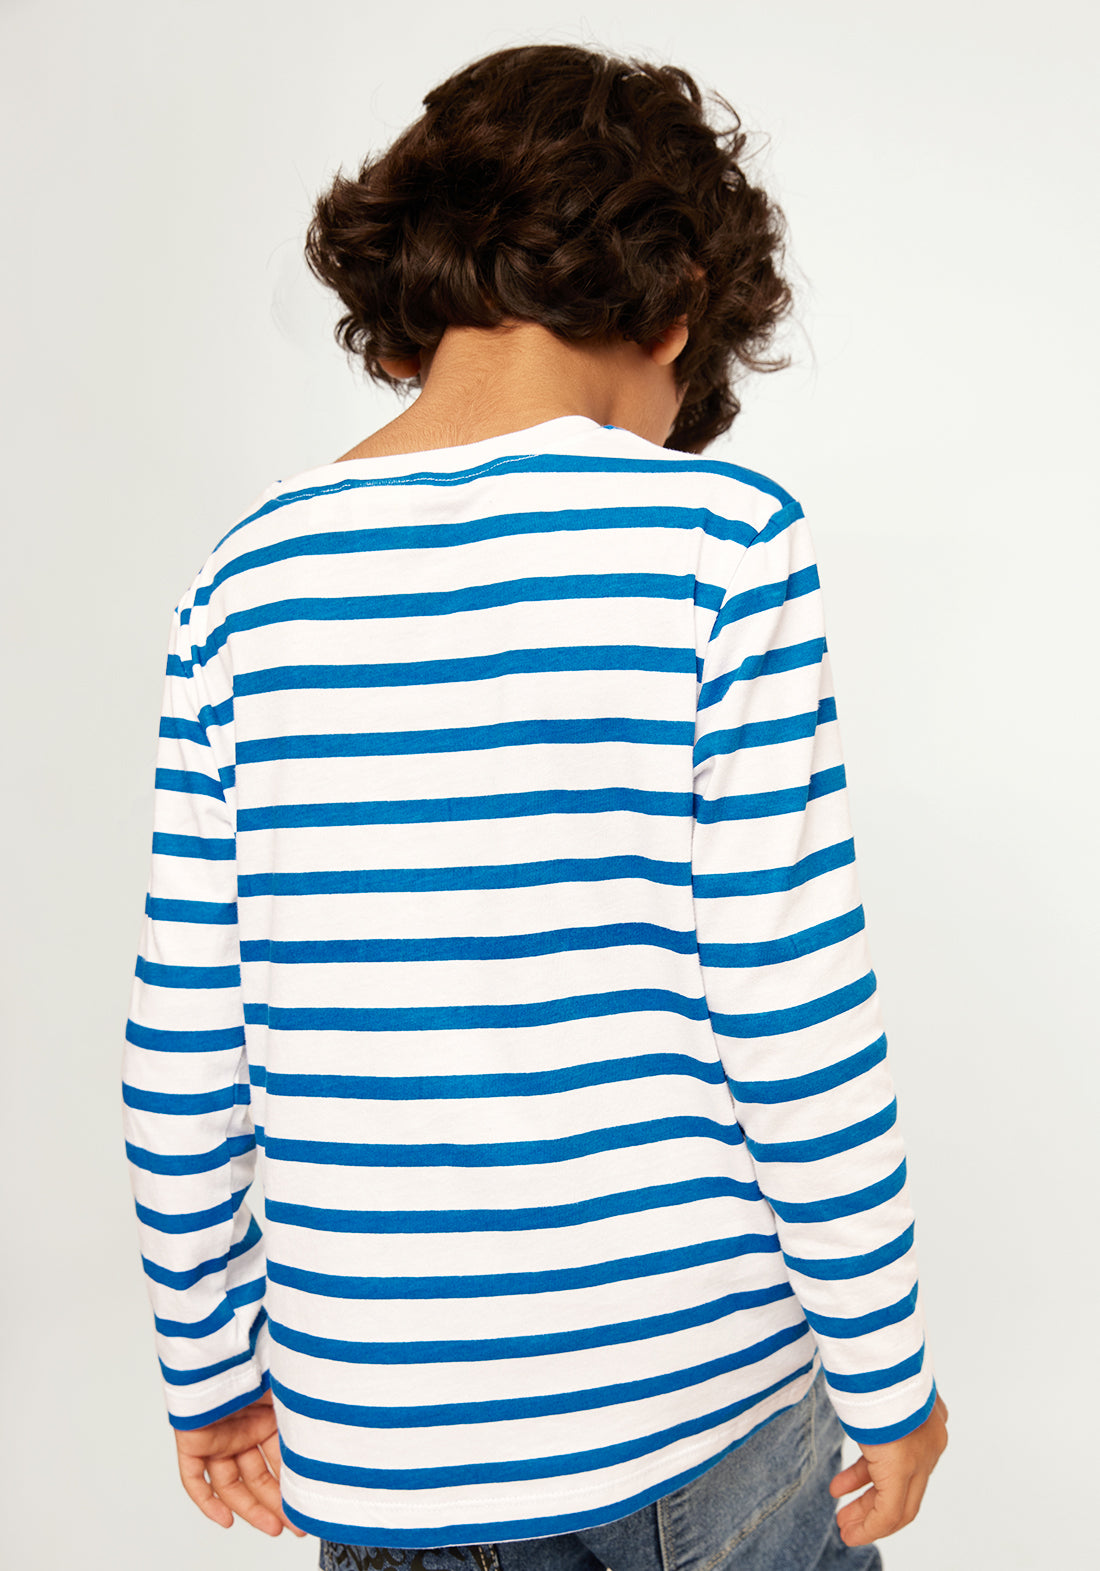 BLUE STRIPE WITH DINO PLACEMENT PRINT TEE